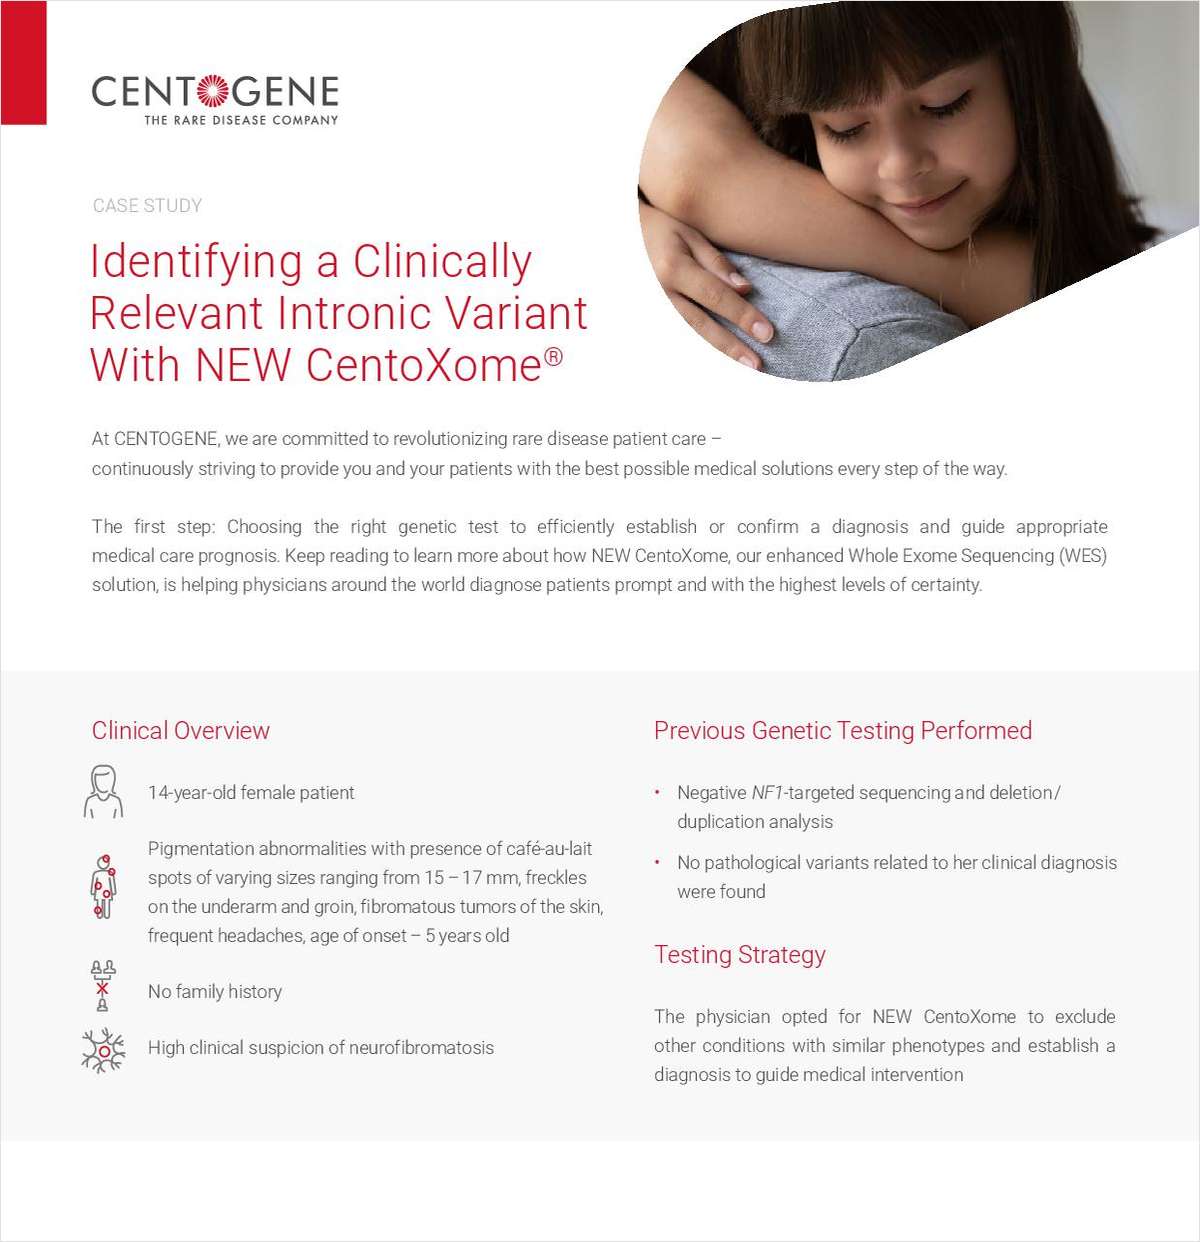 Identifying a Clinically Relevant Intronic Variant With New CentoXome